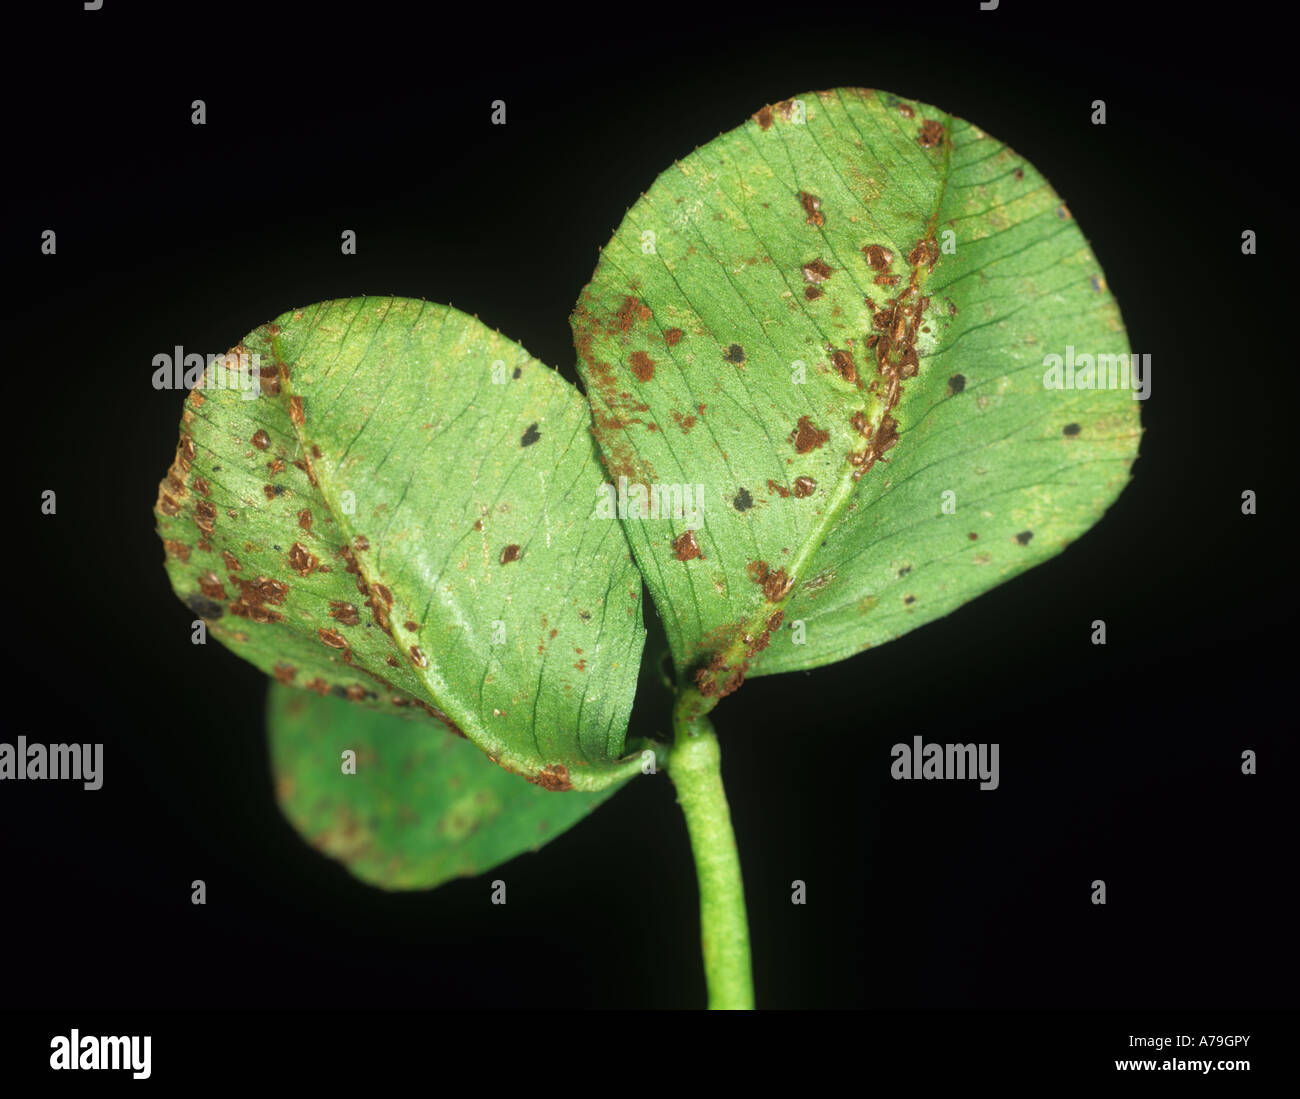 Clover rust Uromyces nerviphilus pustules on the underside of white clover leaves Stock Photo